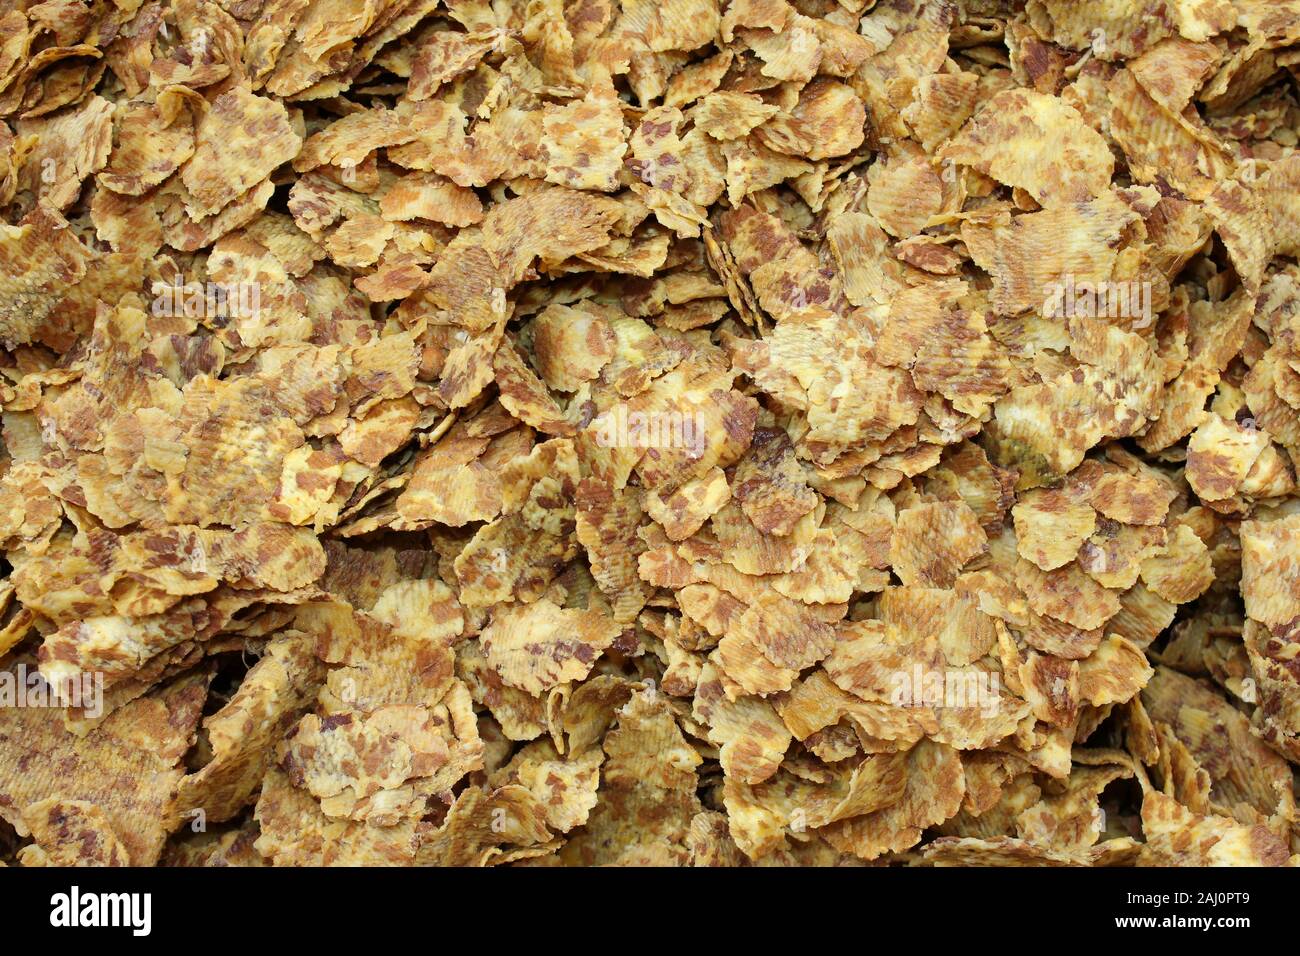 Crisps Made From Deep Fried Crushed Chickpeas, Gujarat, India Stock Photo